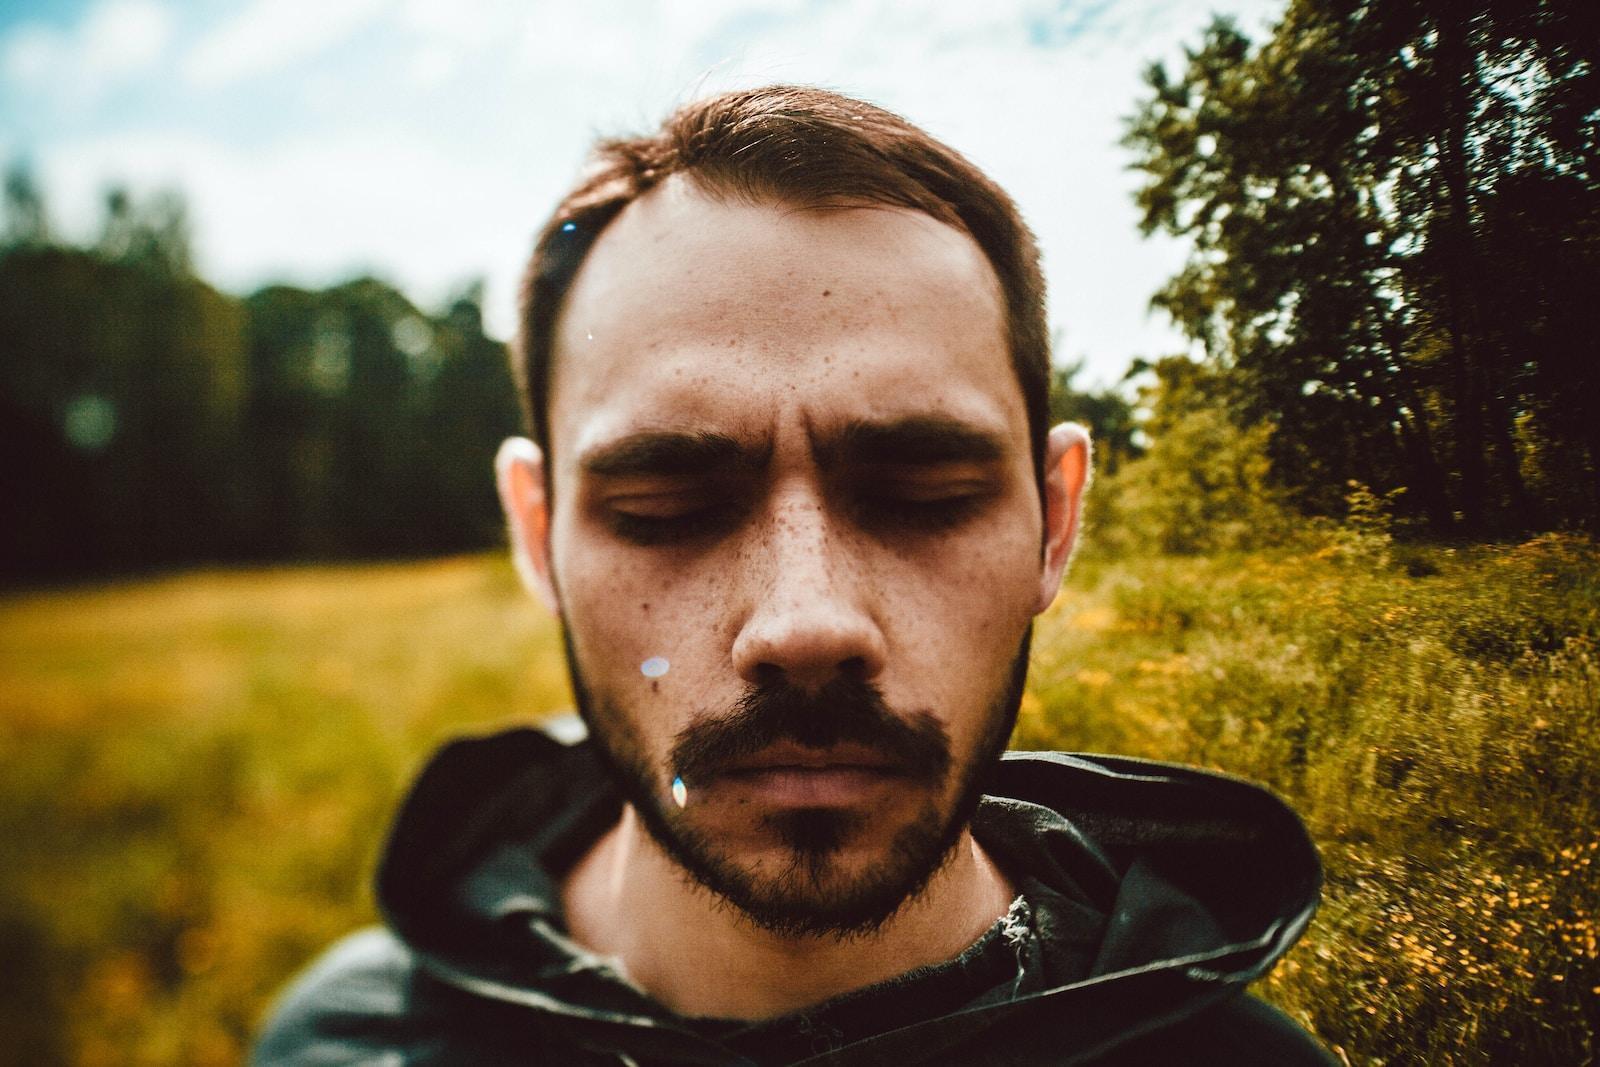 a man with a cigarette in his mouth standing in a field